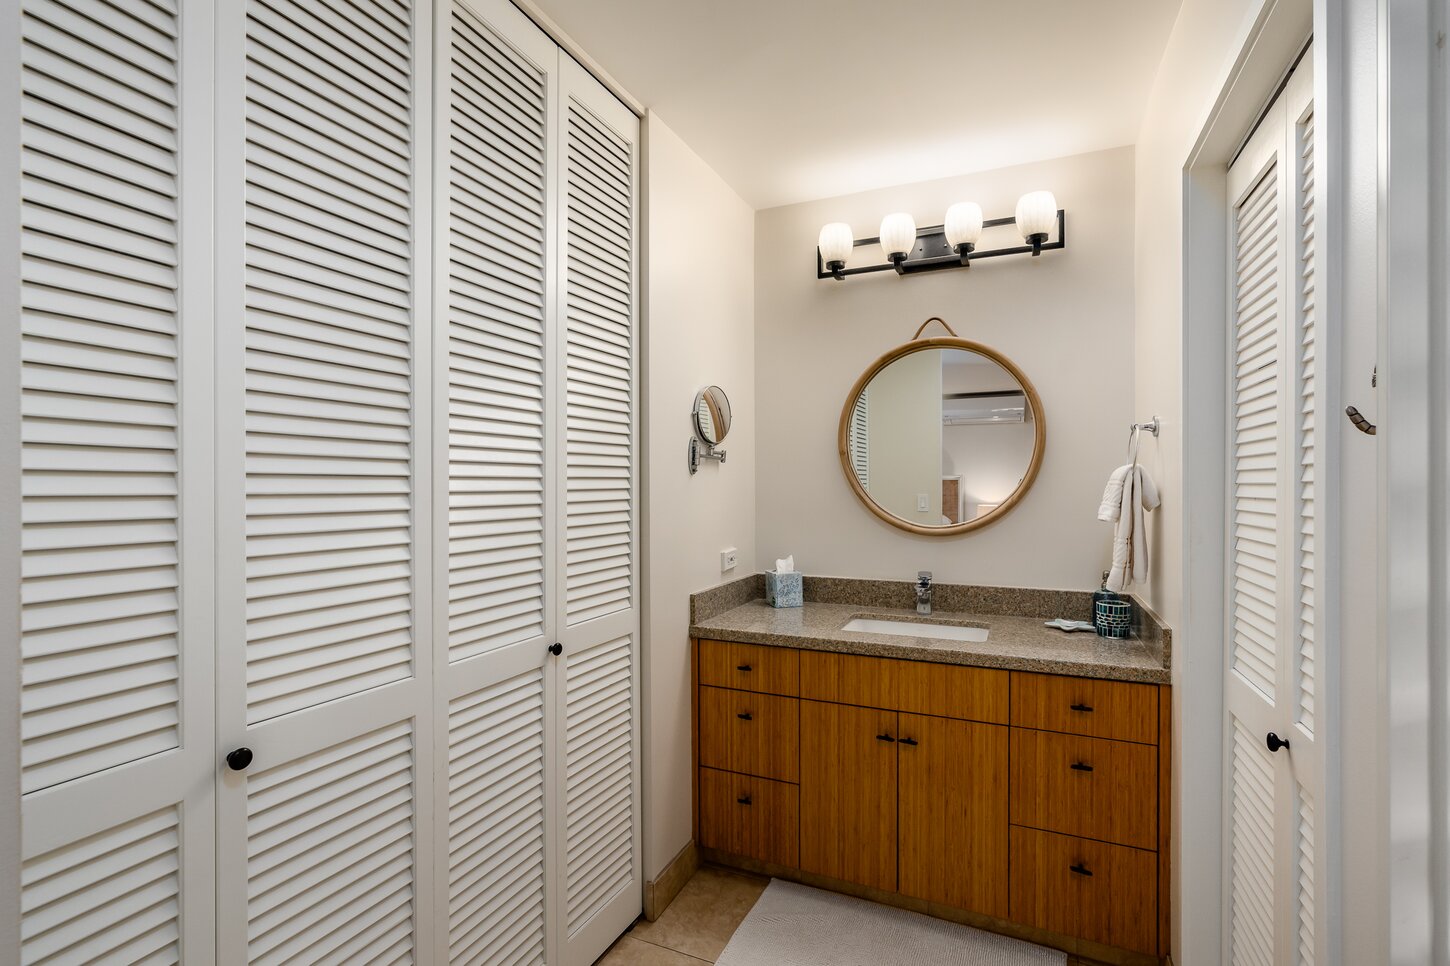 The primary bath has a large linen and hanging closet.